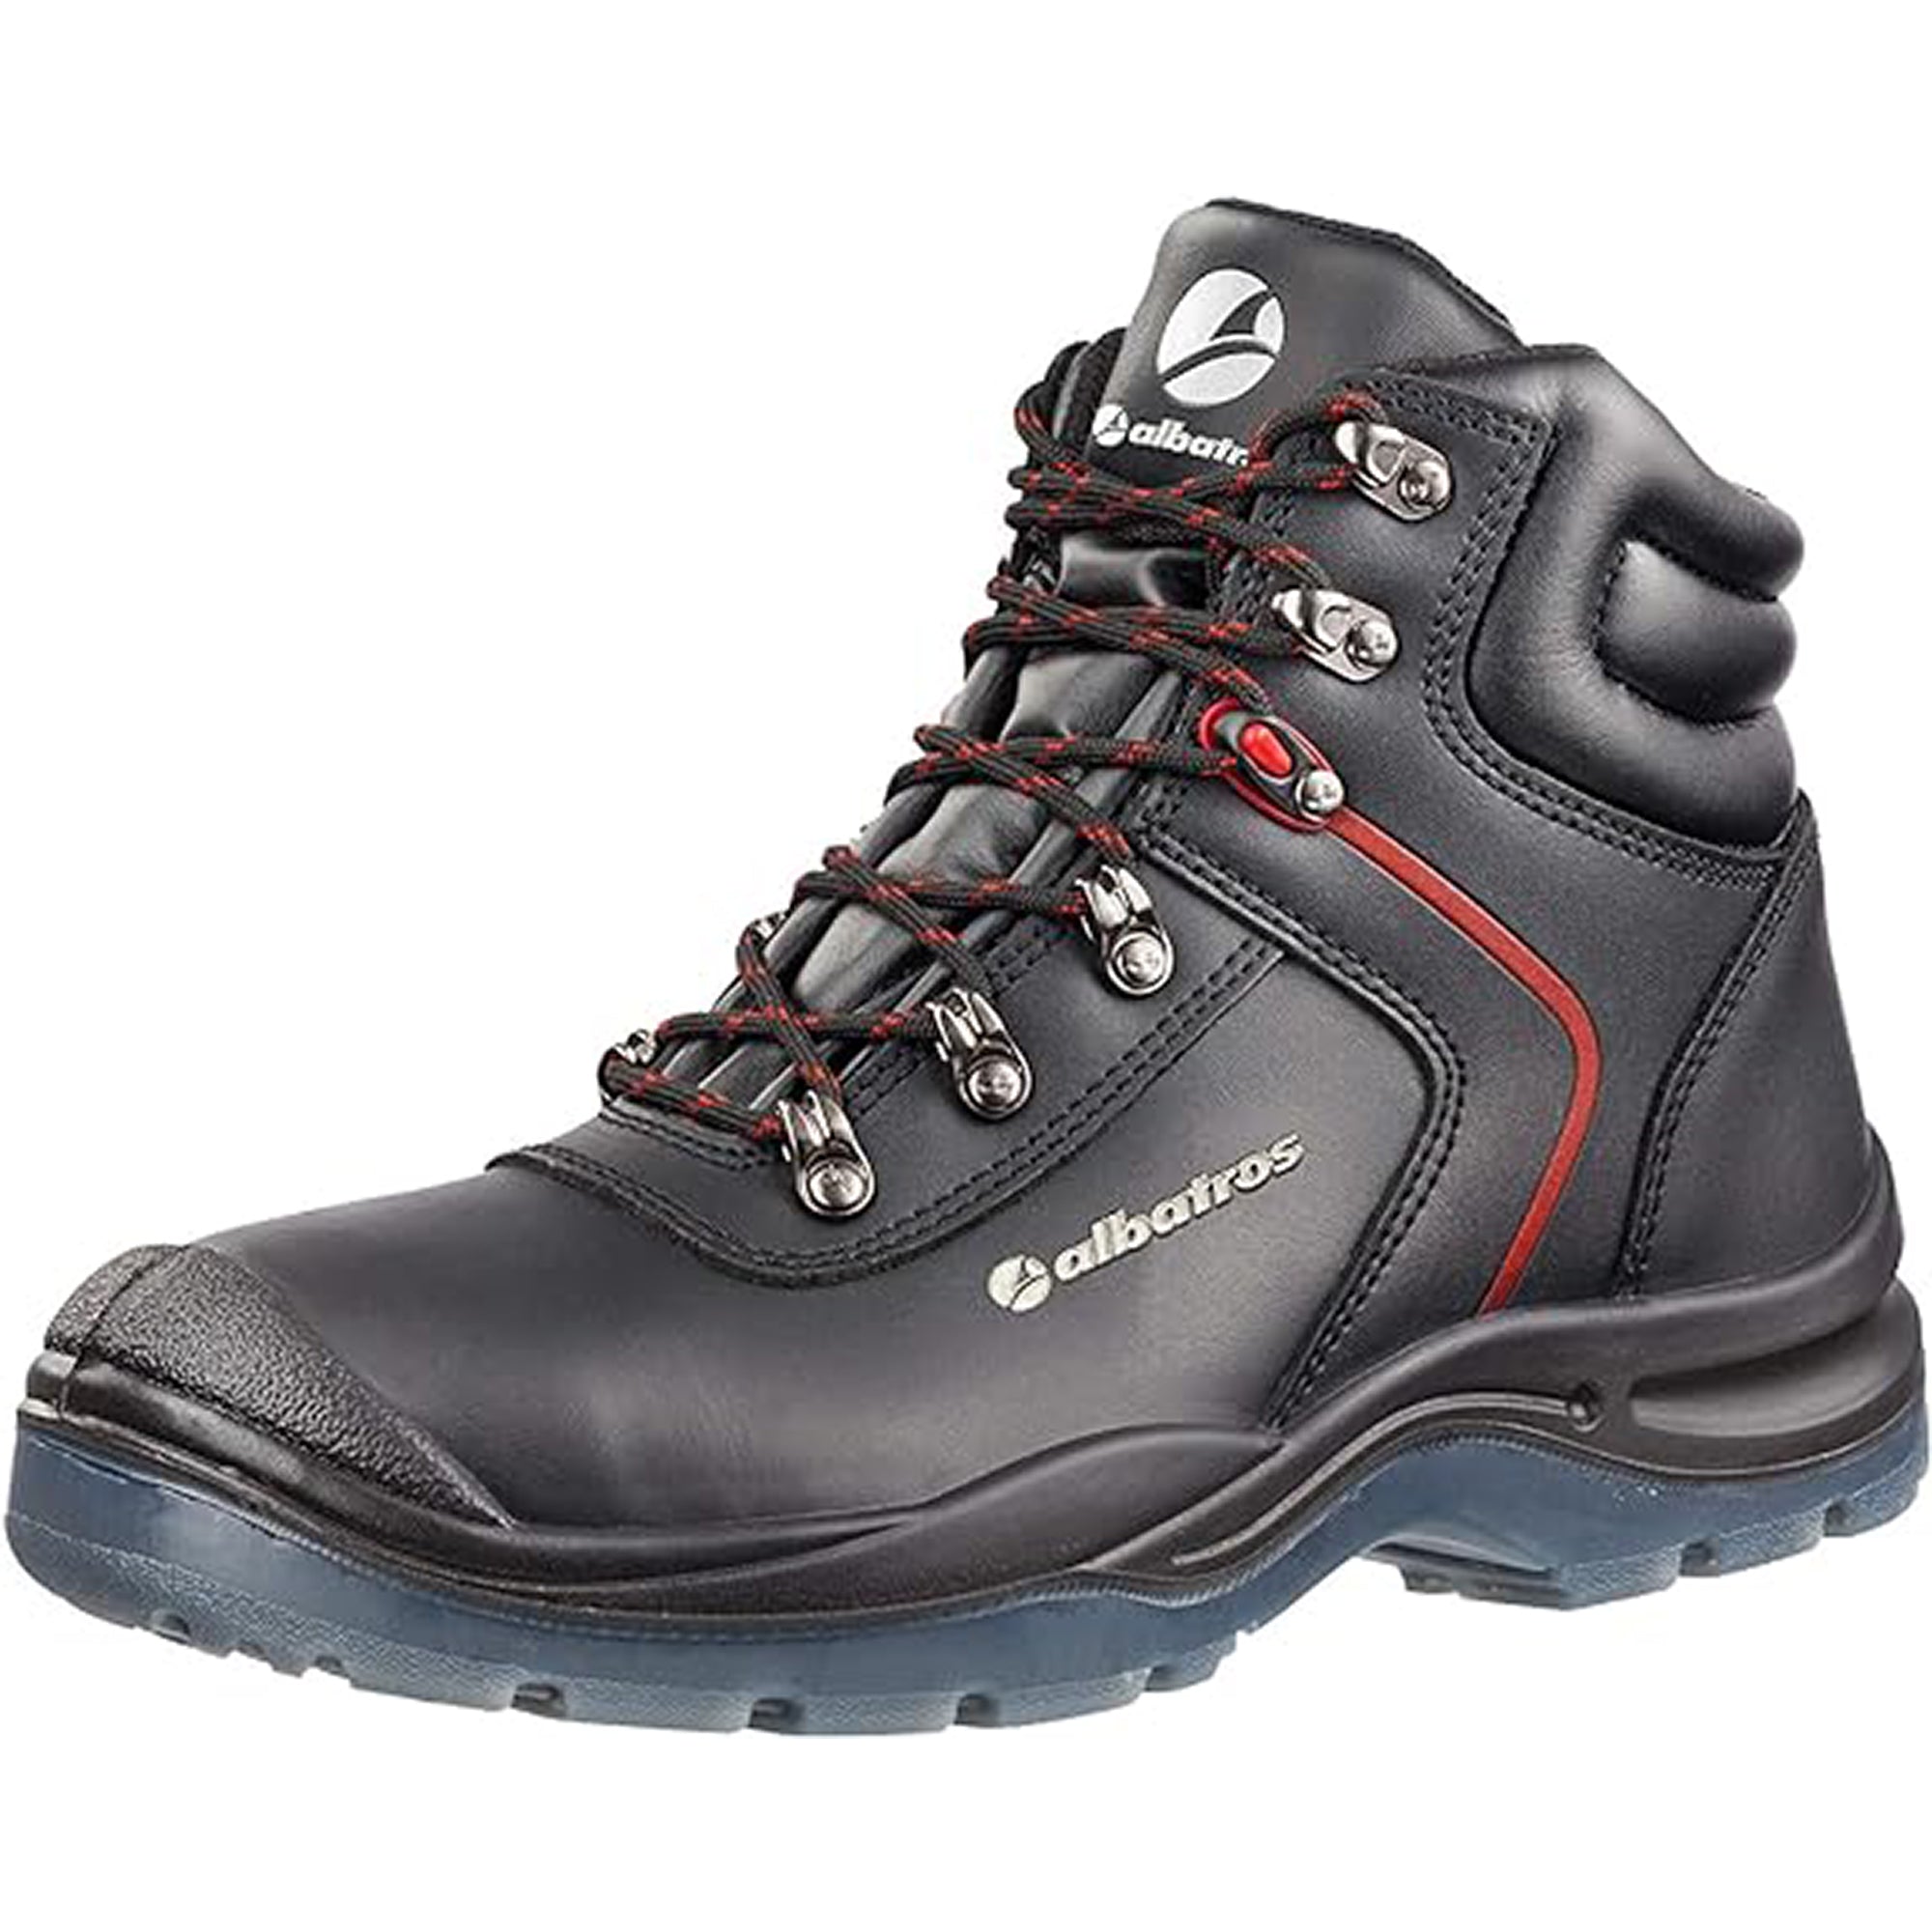 Albatros GRAVITATION mid S3 SRC Safety work boots Steel toe Black Shoes Leather